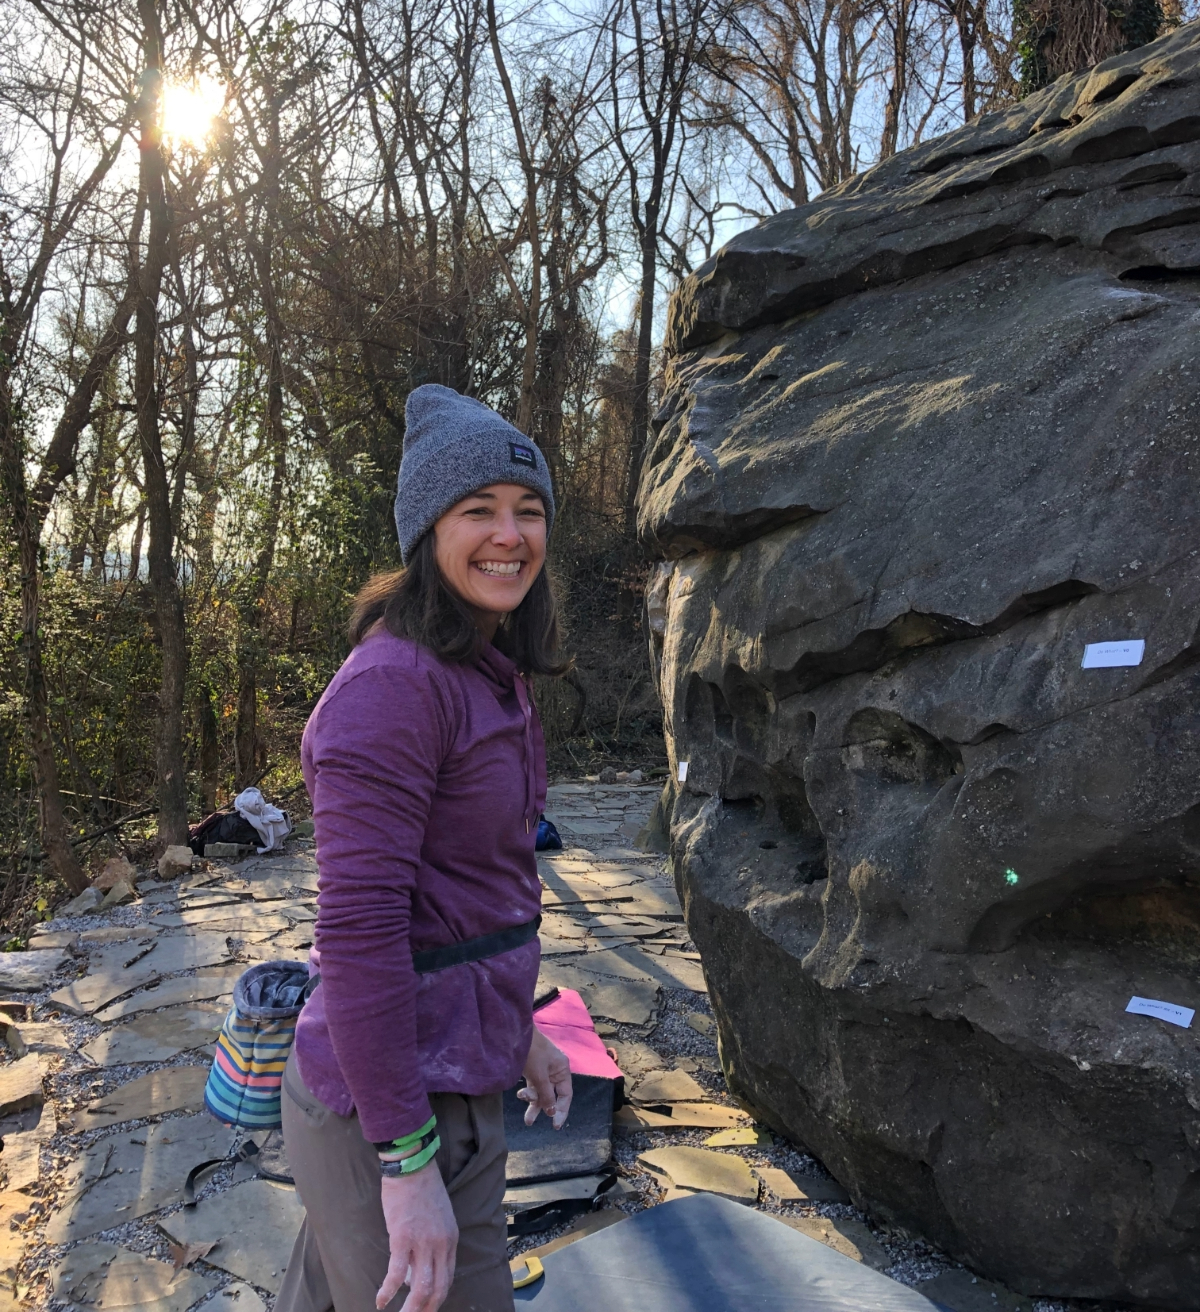 A smiling woman poses in front of a boulder she is about to climb.